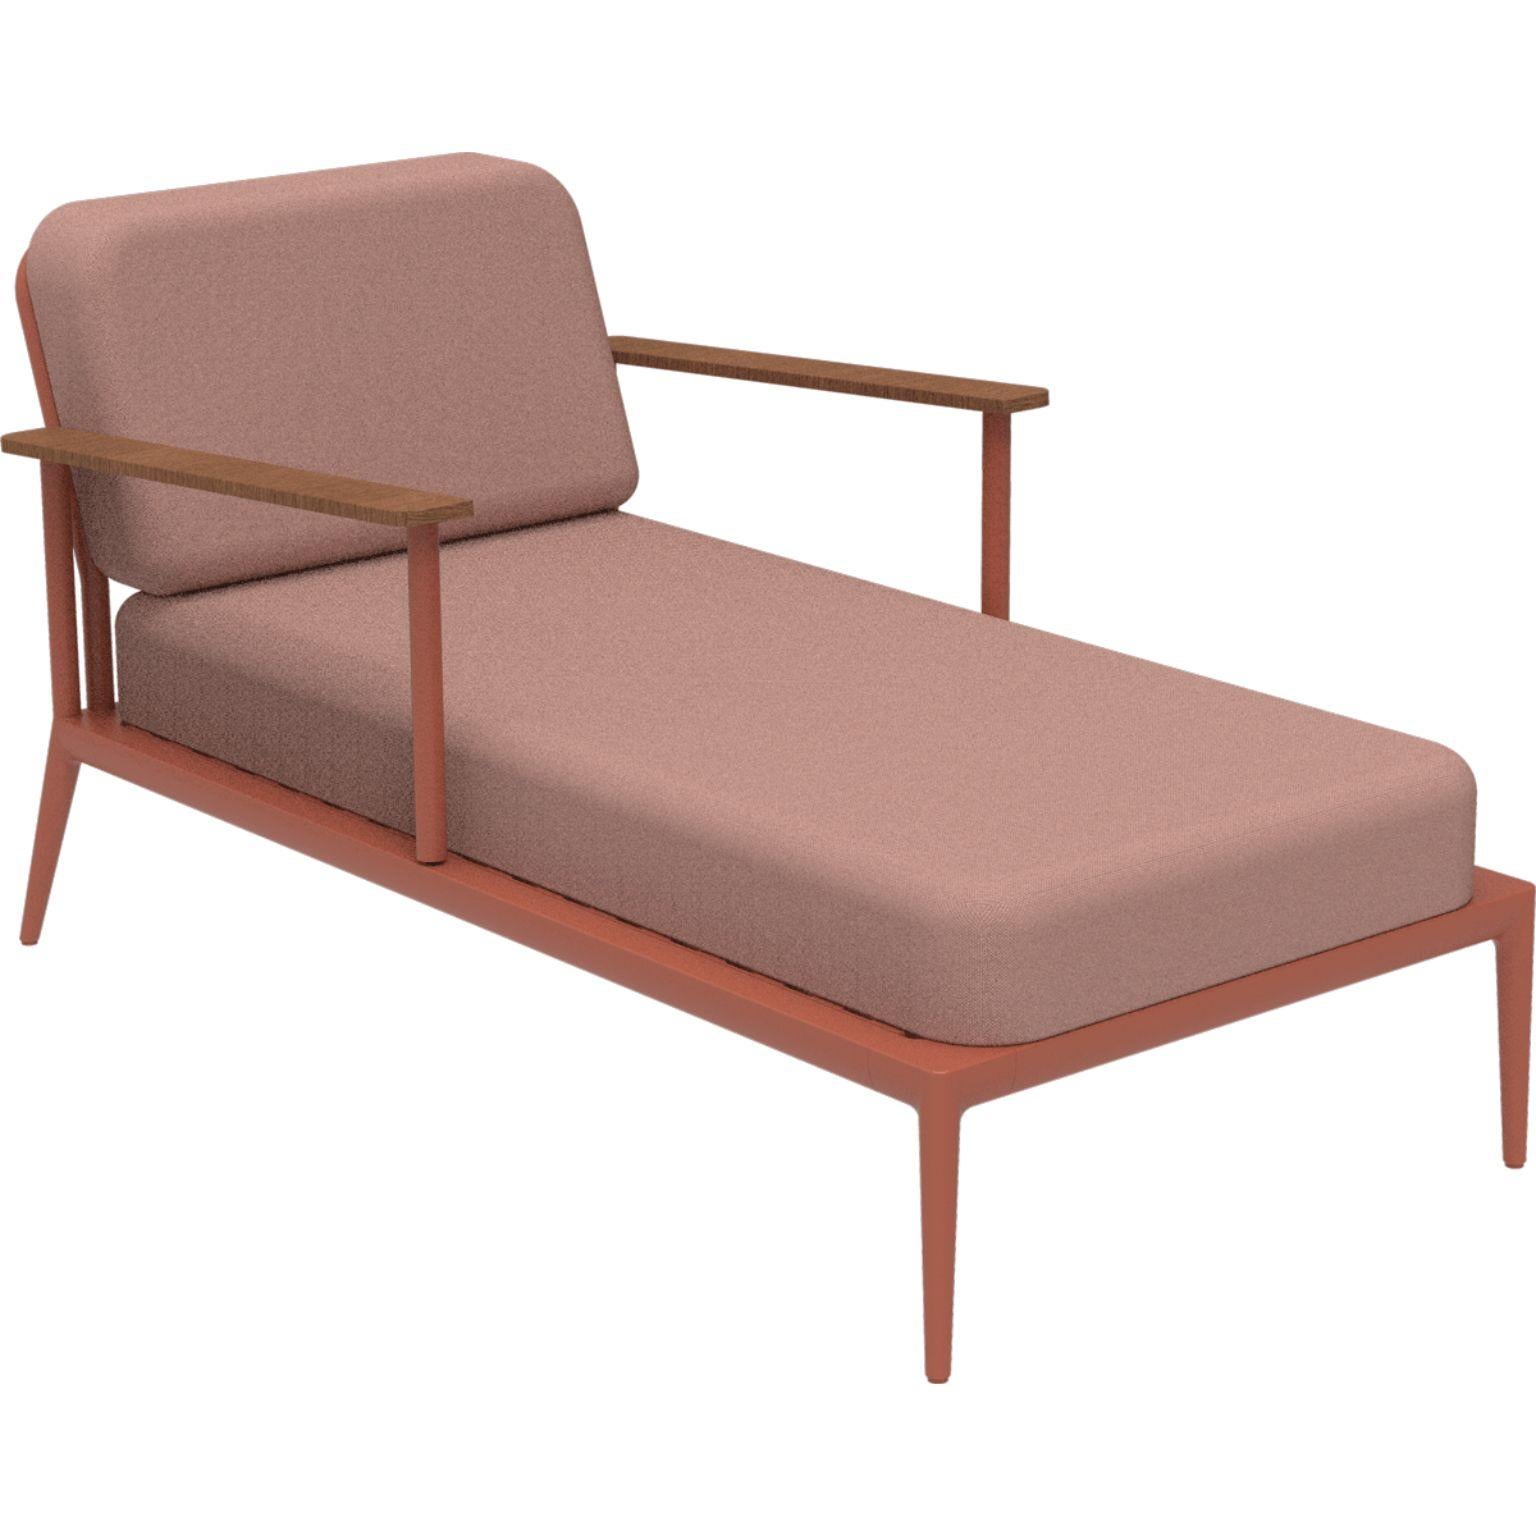 Nature Salmon Divan by MOWEE
Dimensions: D155 x W83 x H81 cm (seat height 42 cm).
Material: Aluminum, upholstery and Iroko wood.
Weight: 30 kg.
Also available in different colors and finishes. Please contact us.

An unmistakable collection for